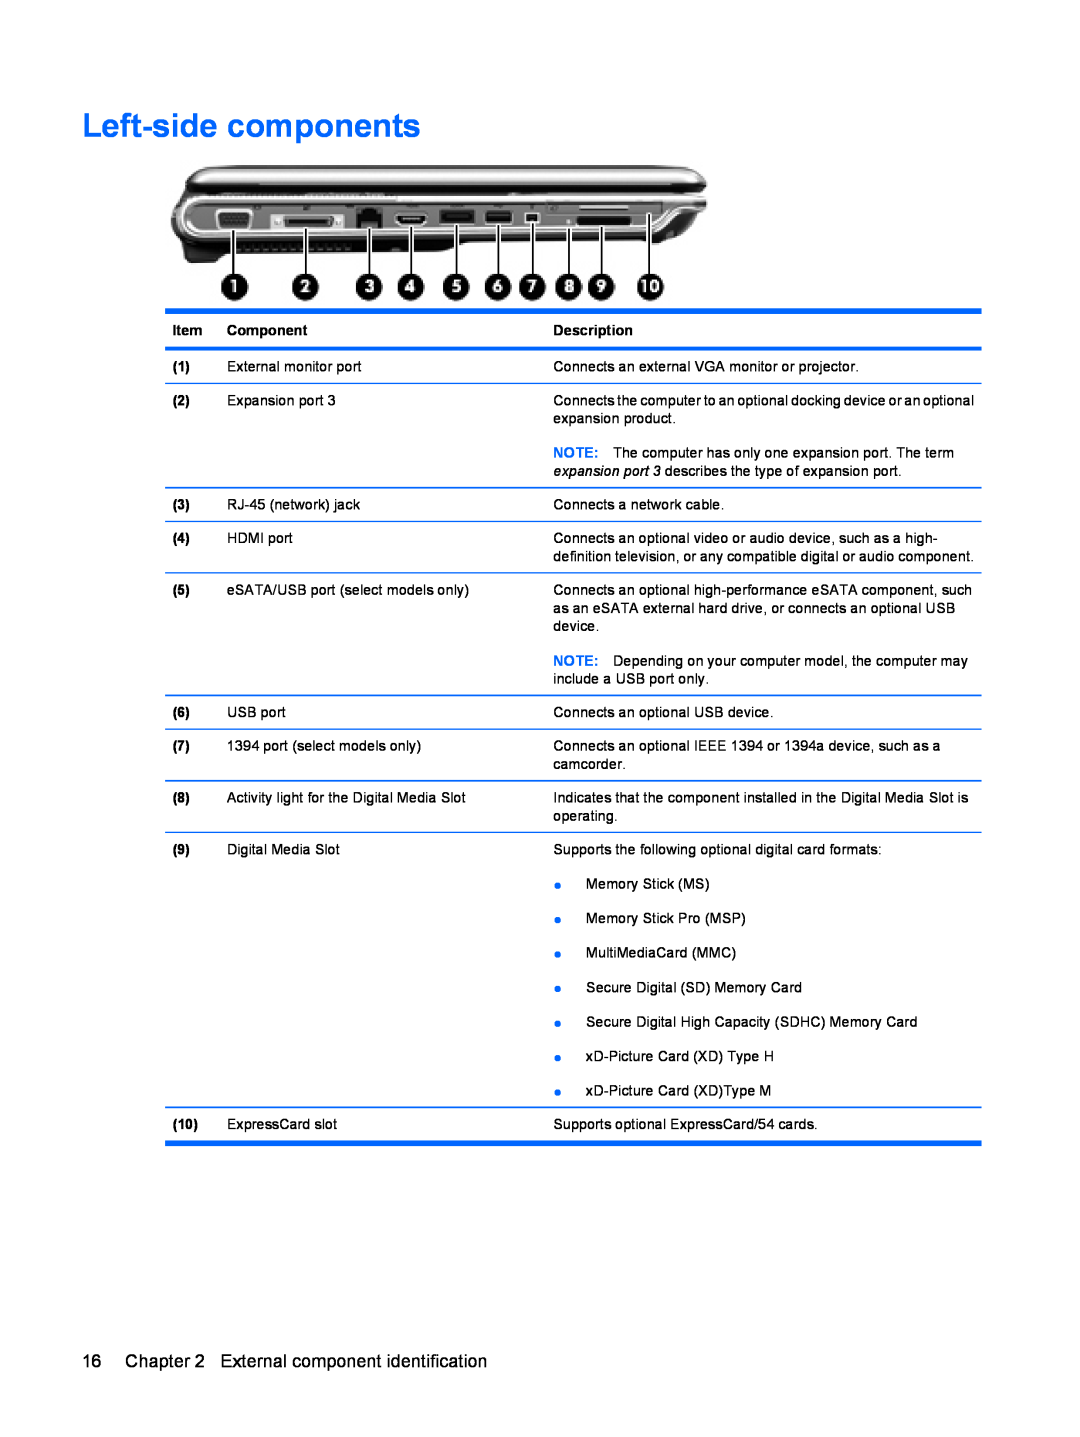 HP DV6 manual Left-side components, External component identification 